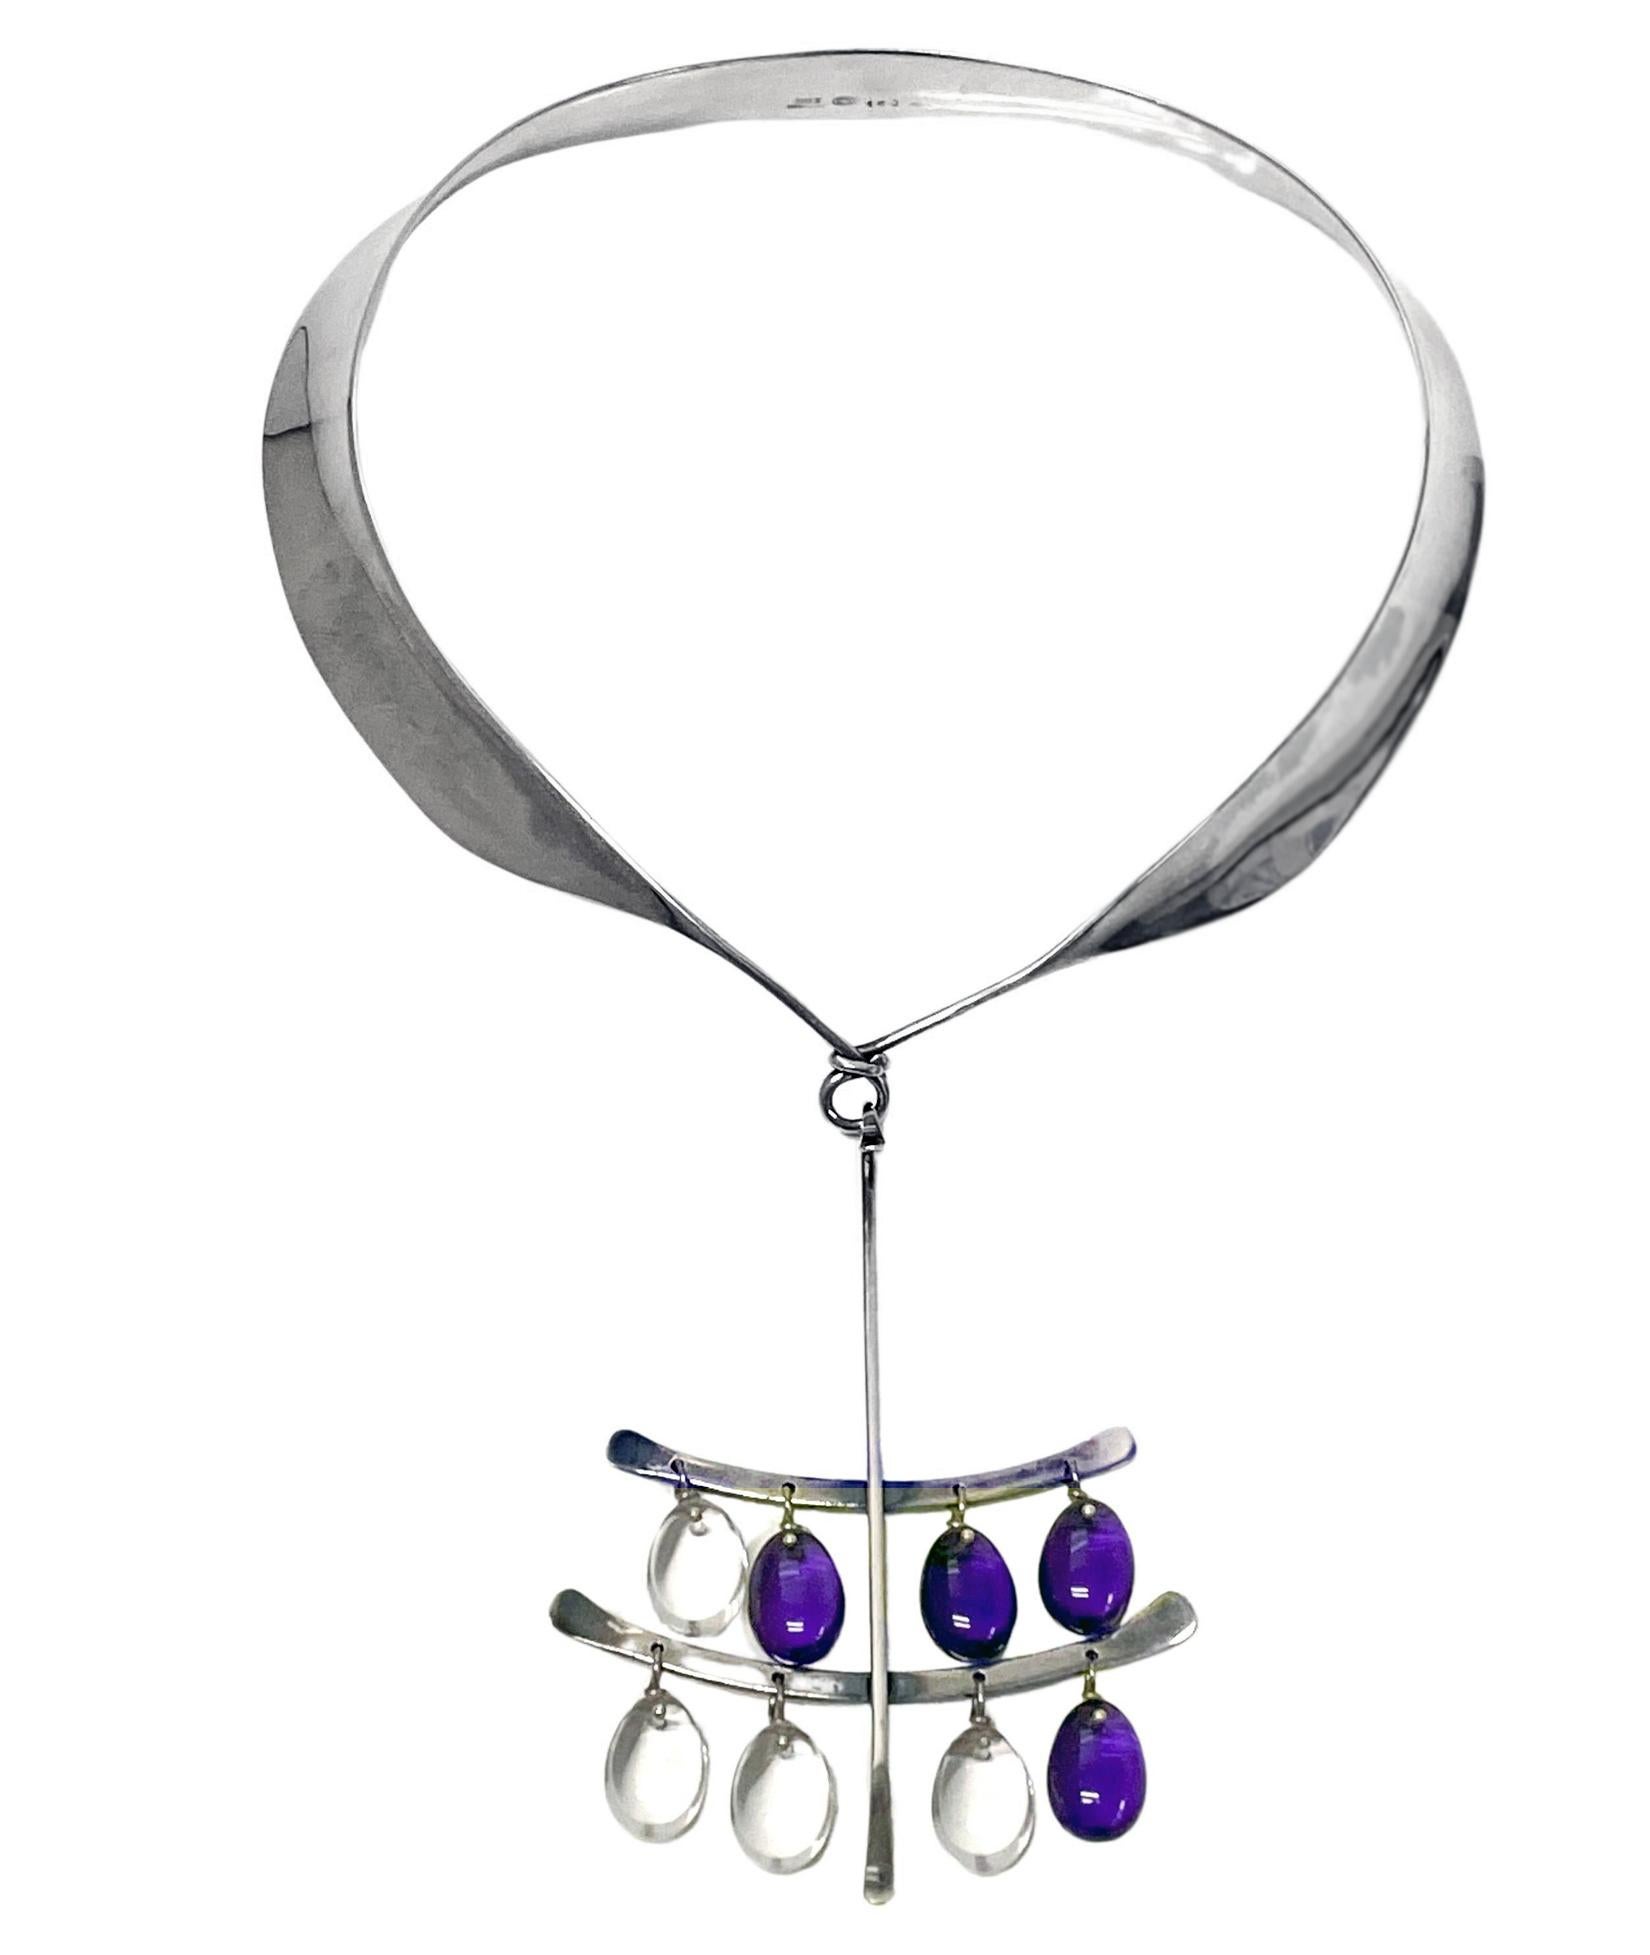 Rare Sterling Silver Necklace and double tear drop design no 135 with Amethyst and Quartz Drops Designed by Vivianna Torun Bulow-Hube for Georg Jensen C.1960, together with Necklet collar No 160. Pendant drop: 4 inches. Pendant width: 2.75 inches.